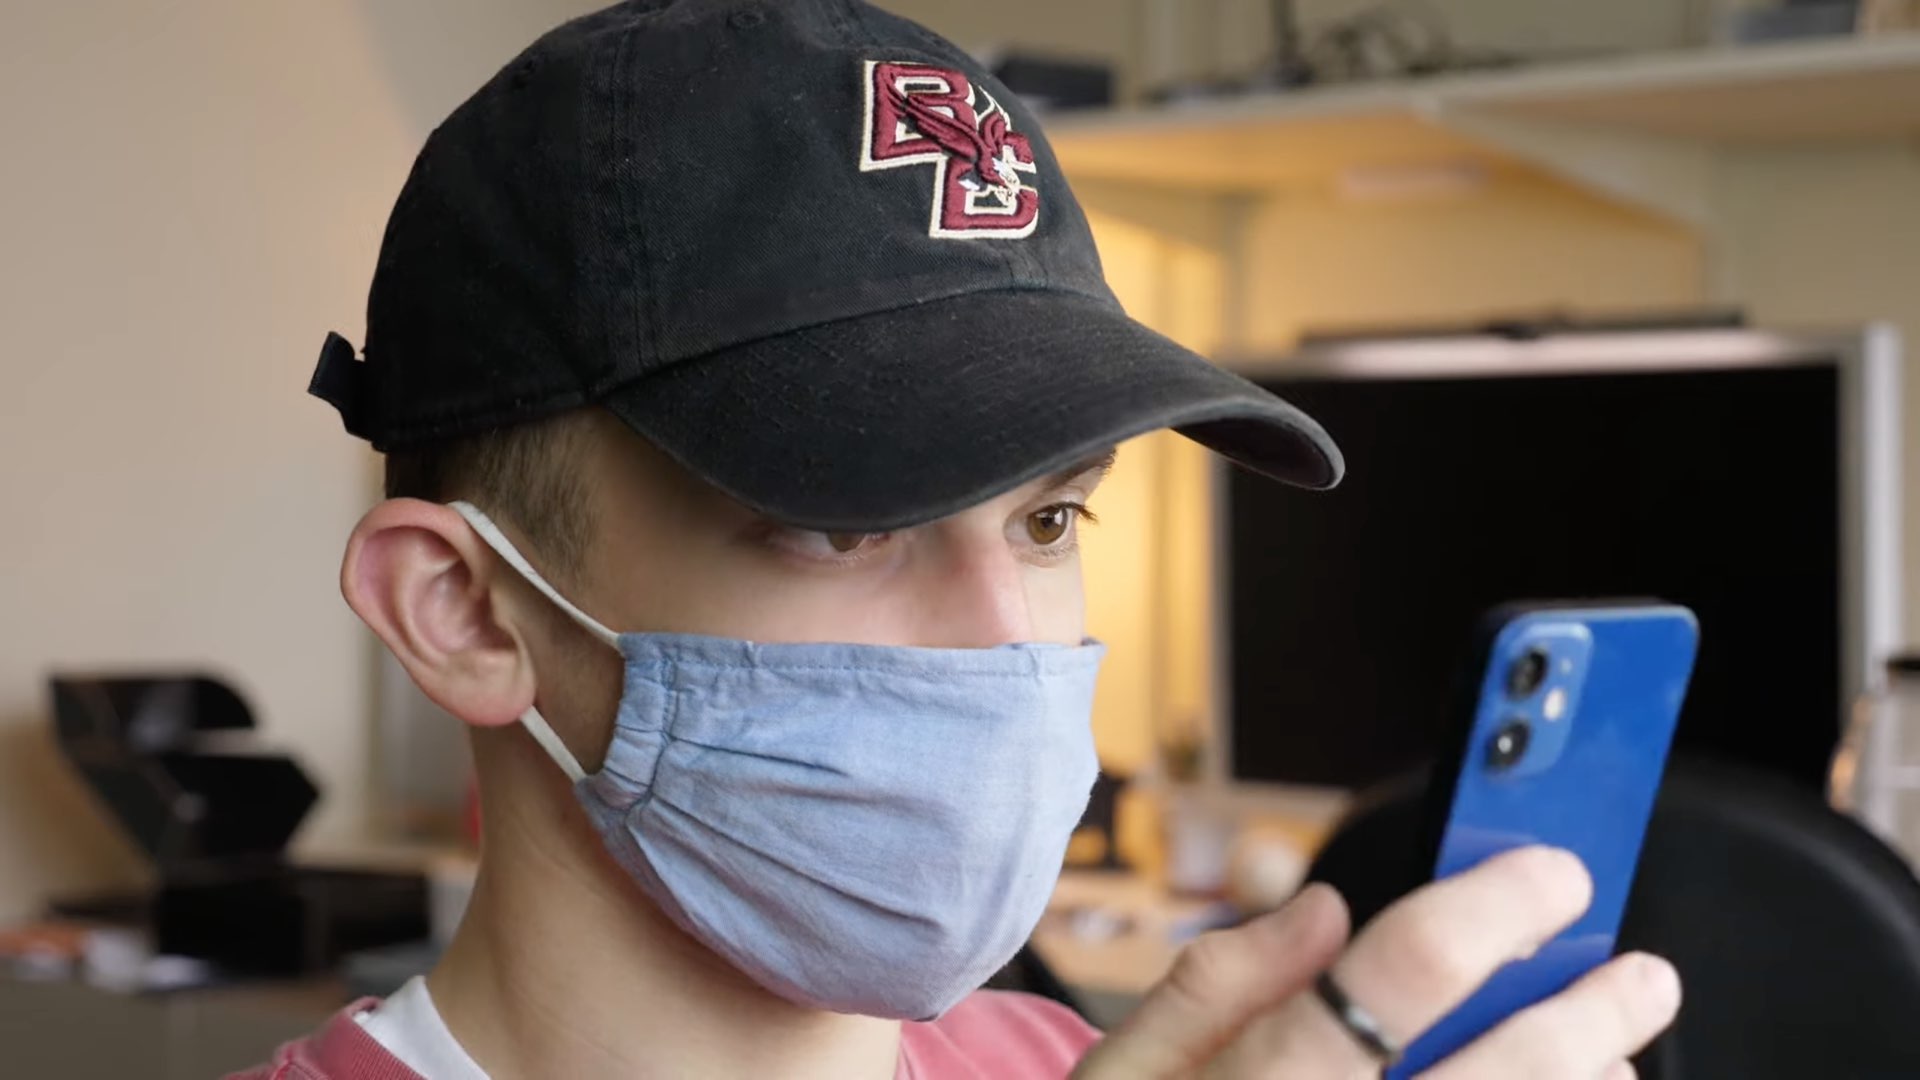 A photo illustrating how to unlock iPhone with Apple Watch while wearing a mask